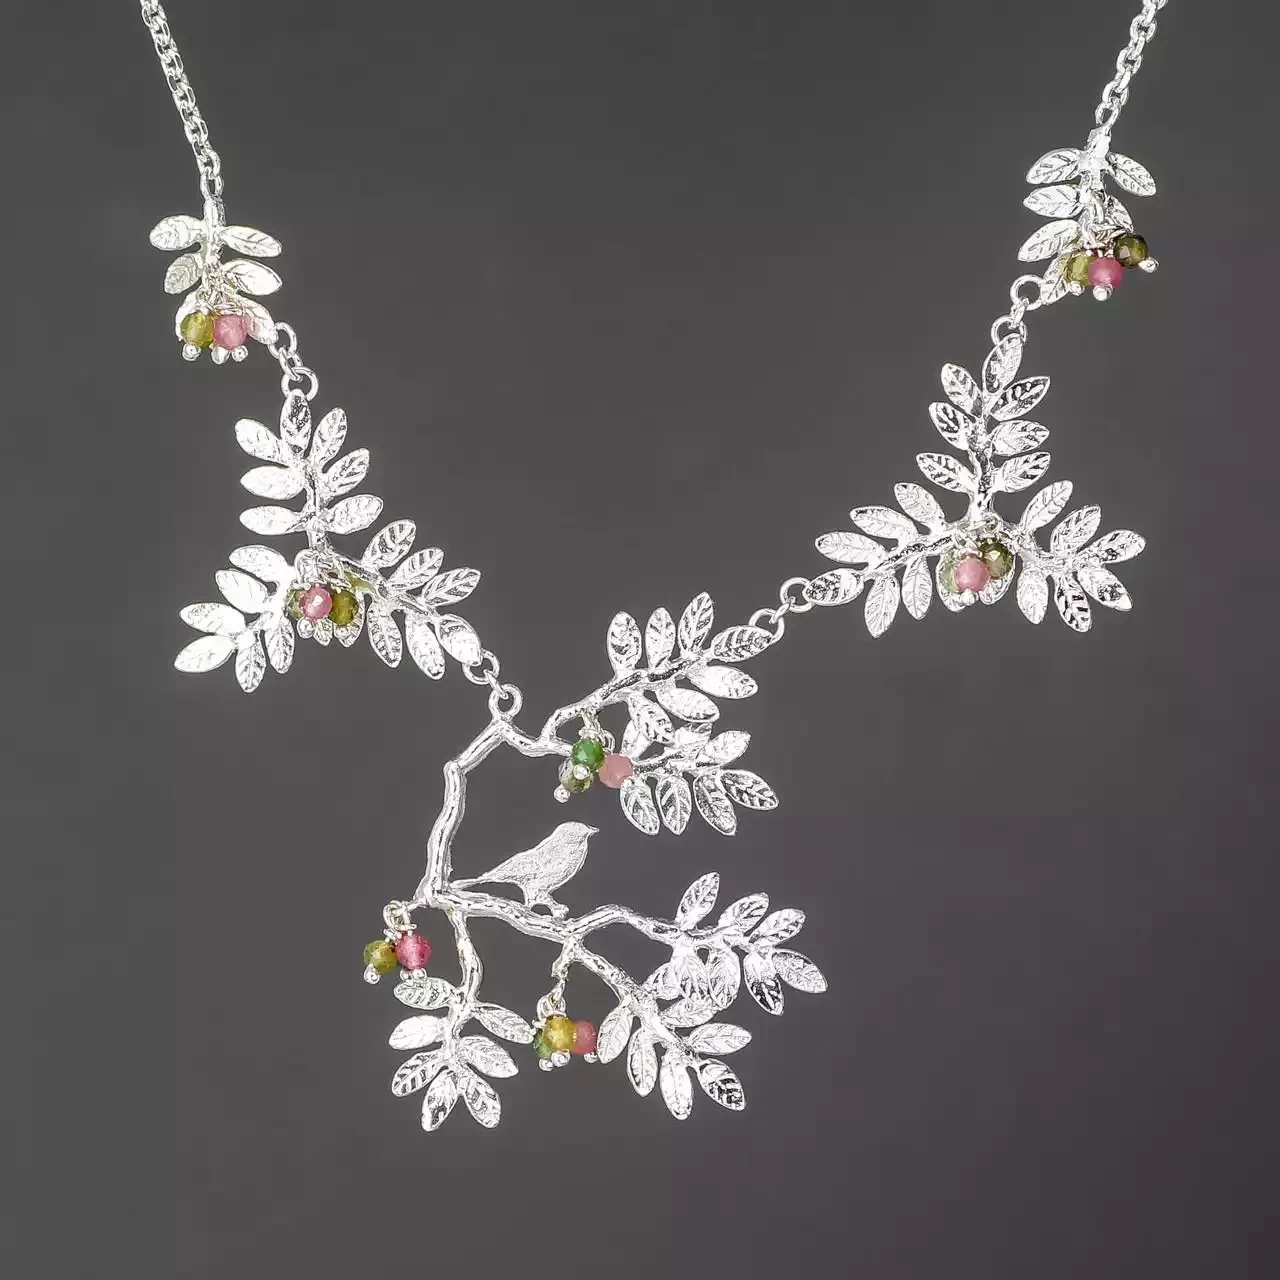 Bird on Branch Silver and Tourmaline Necklace - Large by Amanda Coleman